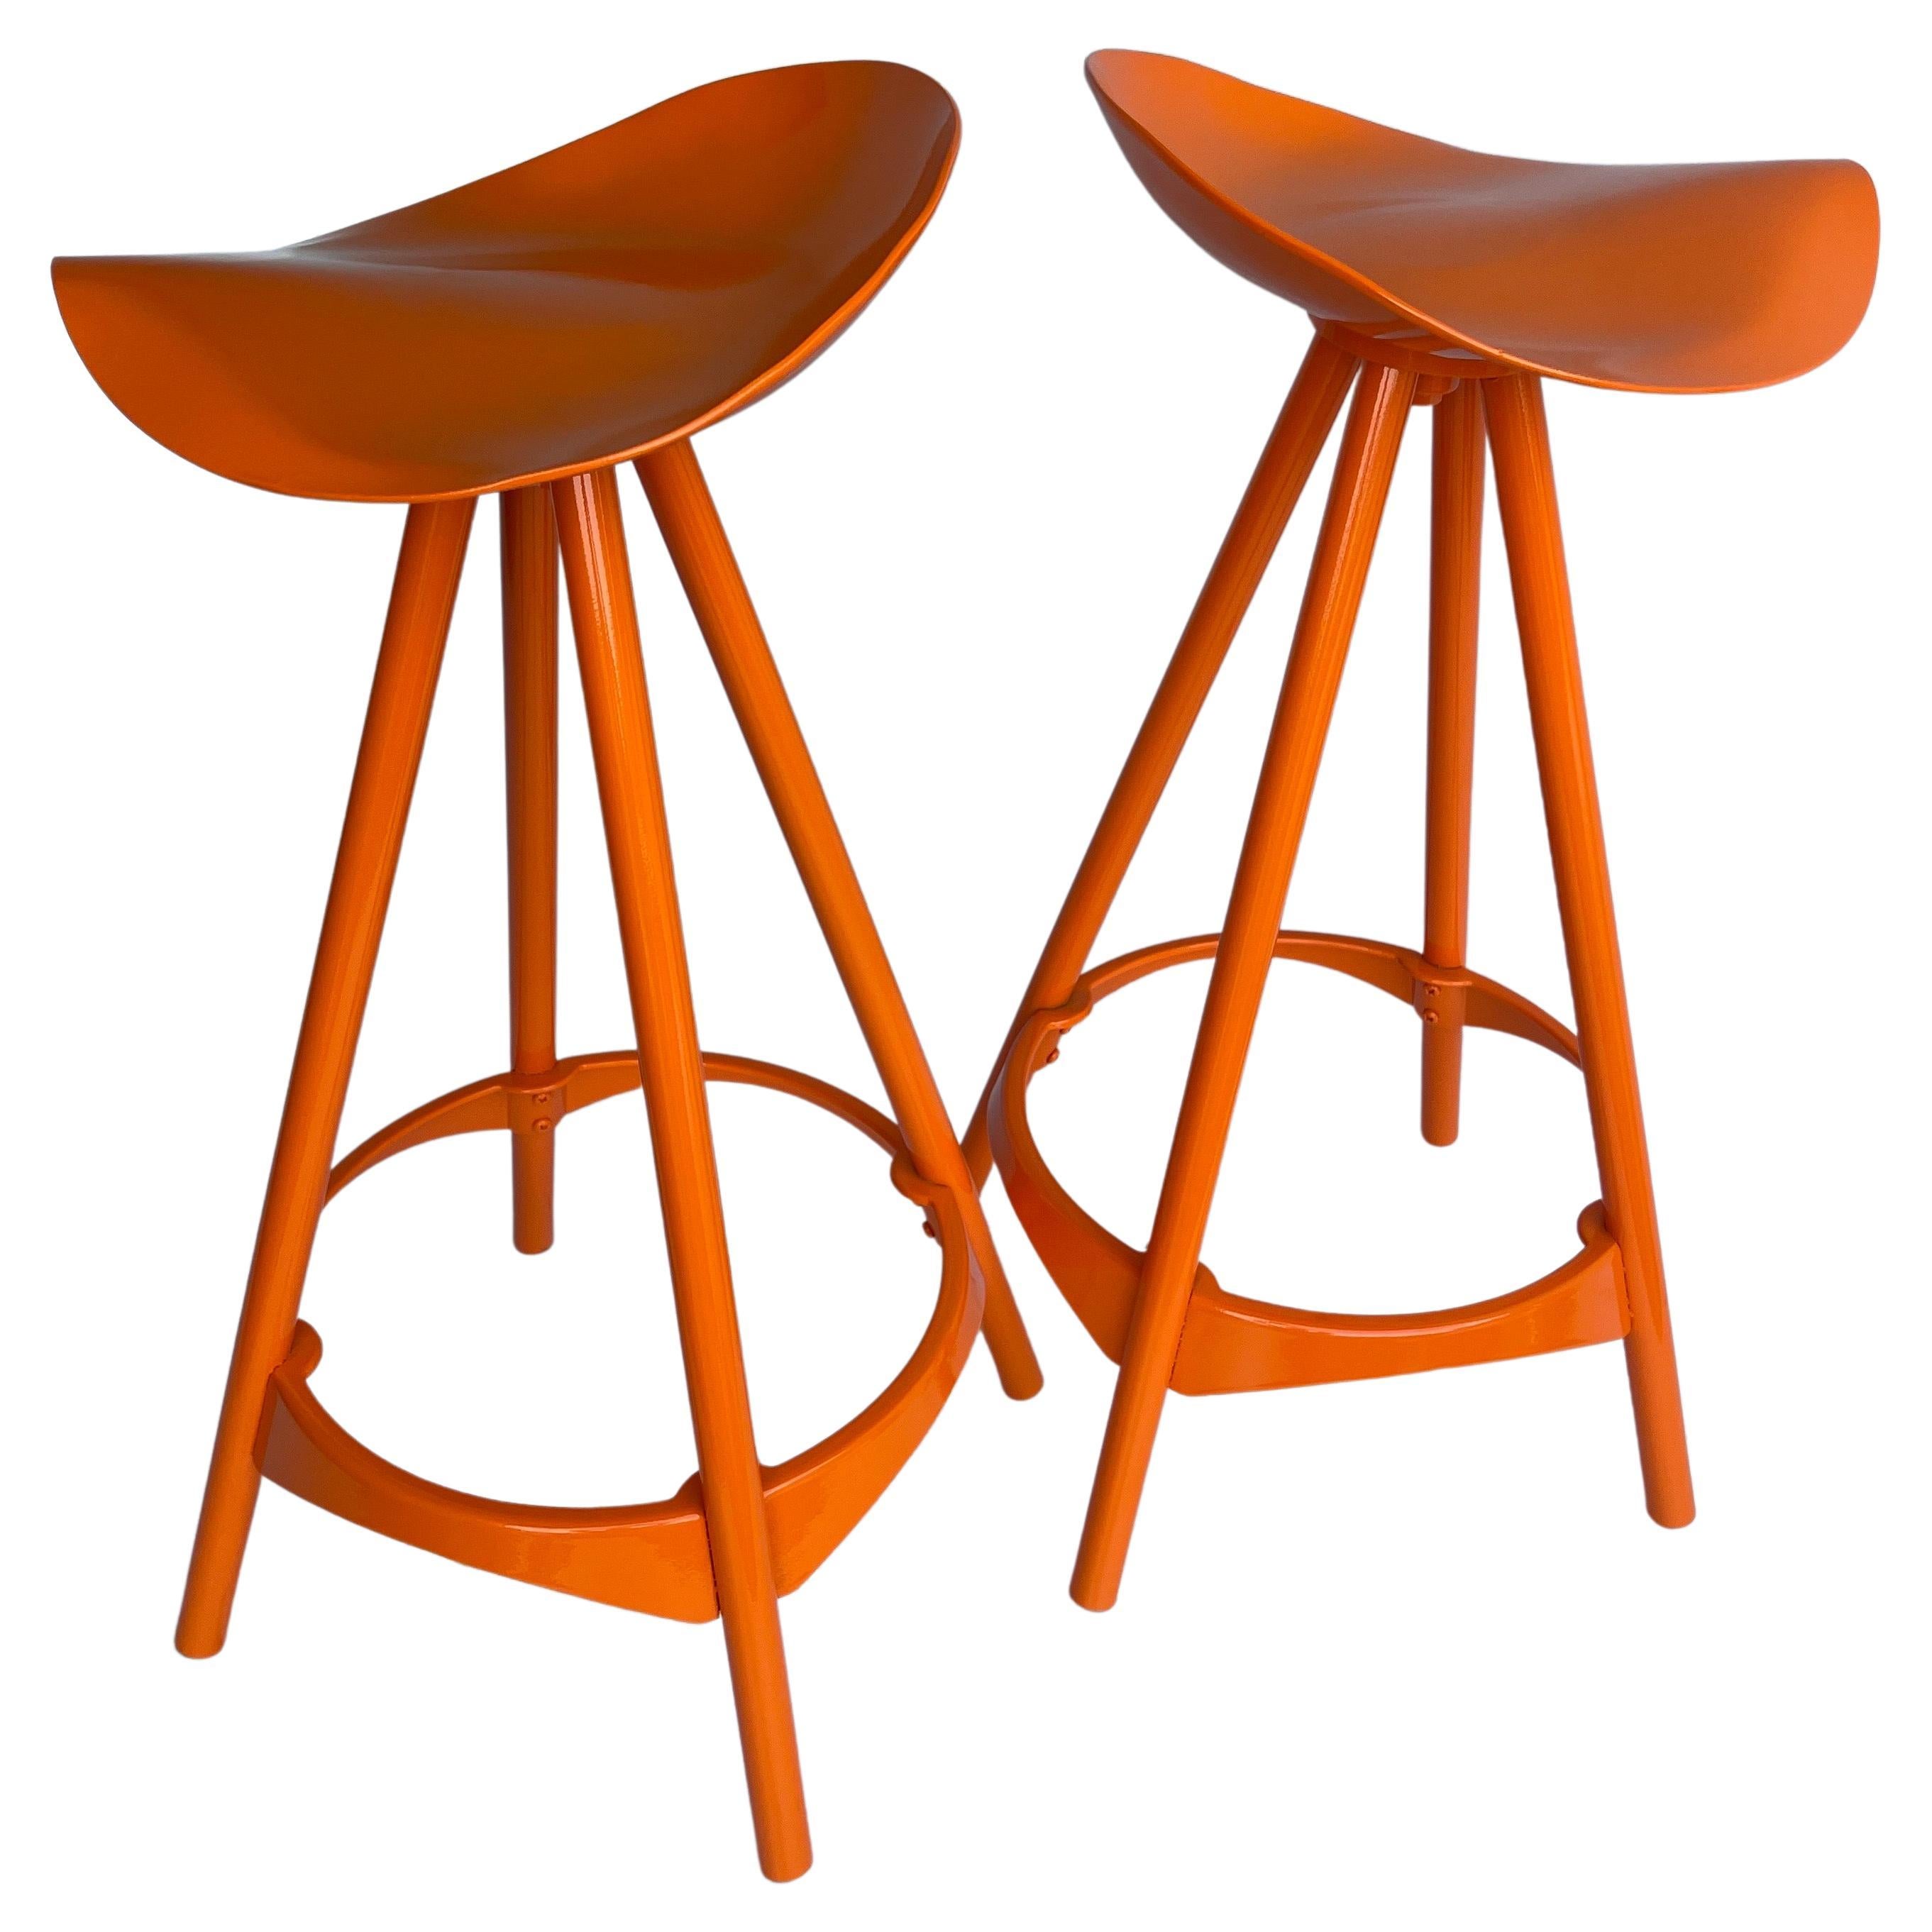 Late 20th Century Pair Industrial Style Swivel Bar Stools, Powder-Coated Orange For Sale